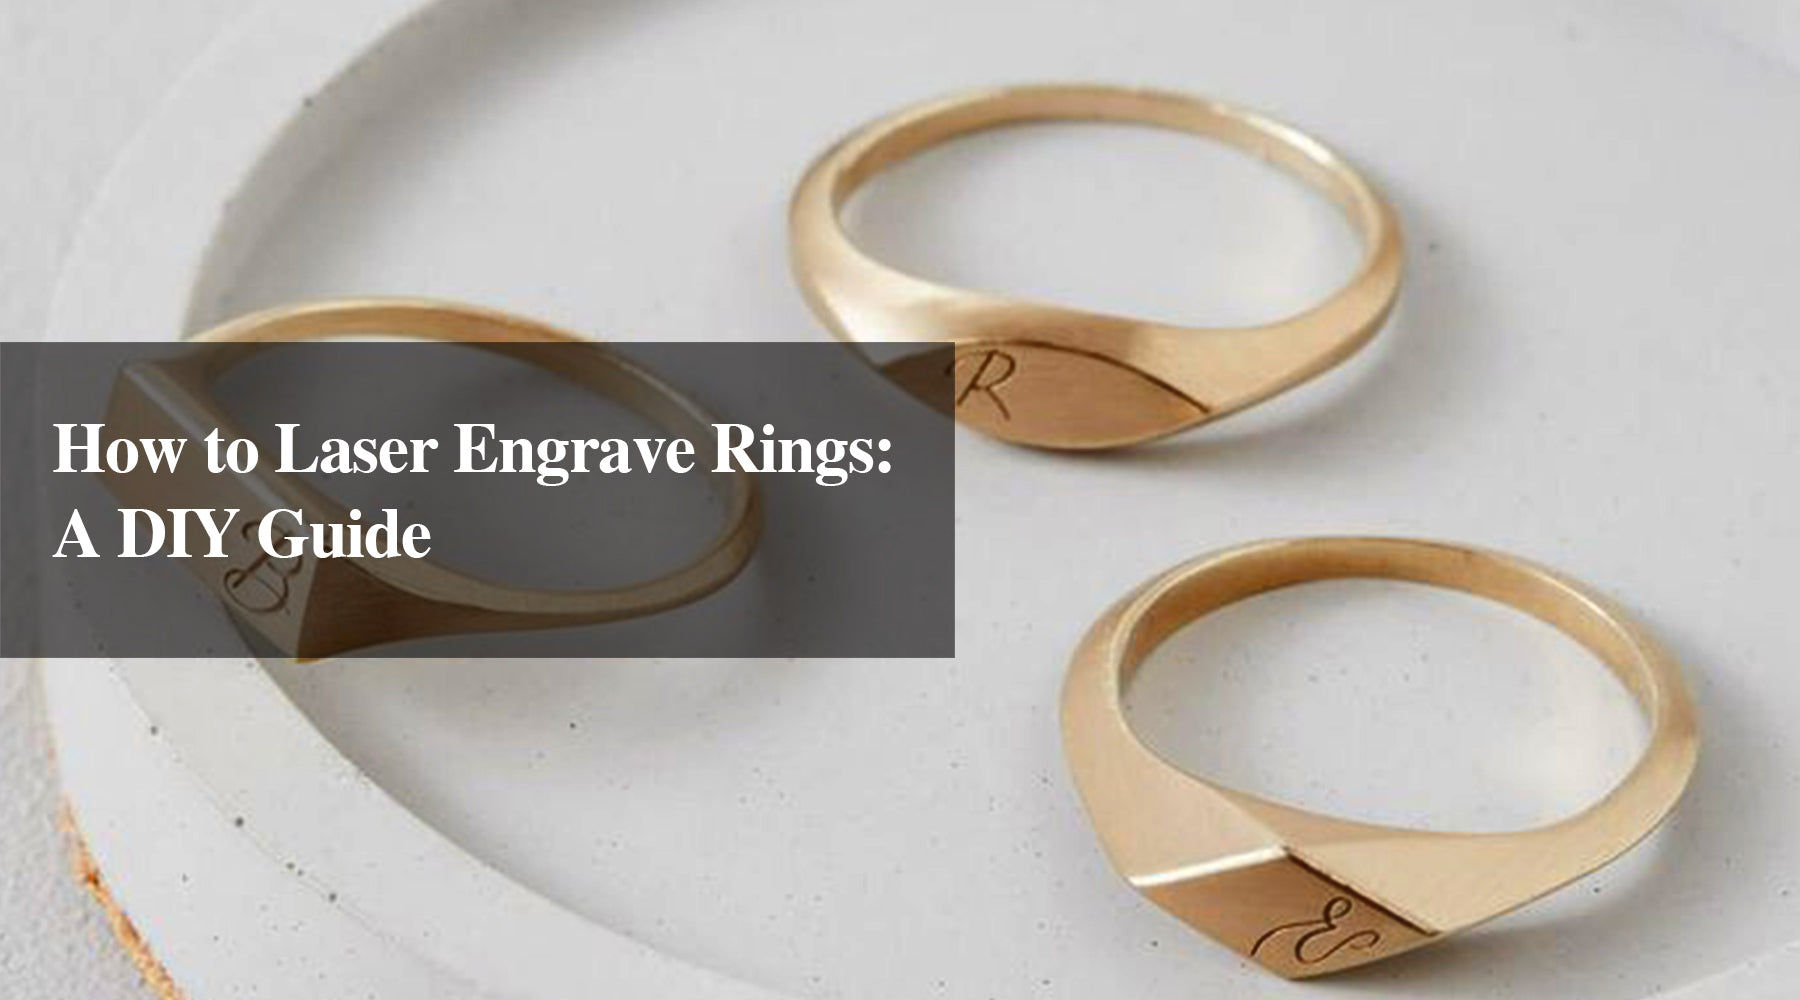 How to Laser Engrave Rings: A DIY Guide